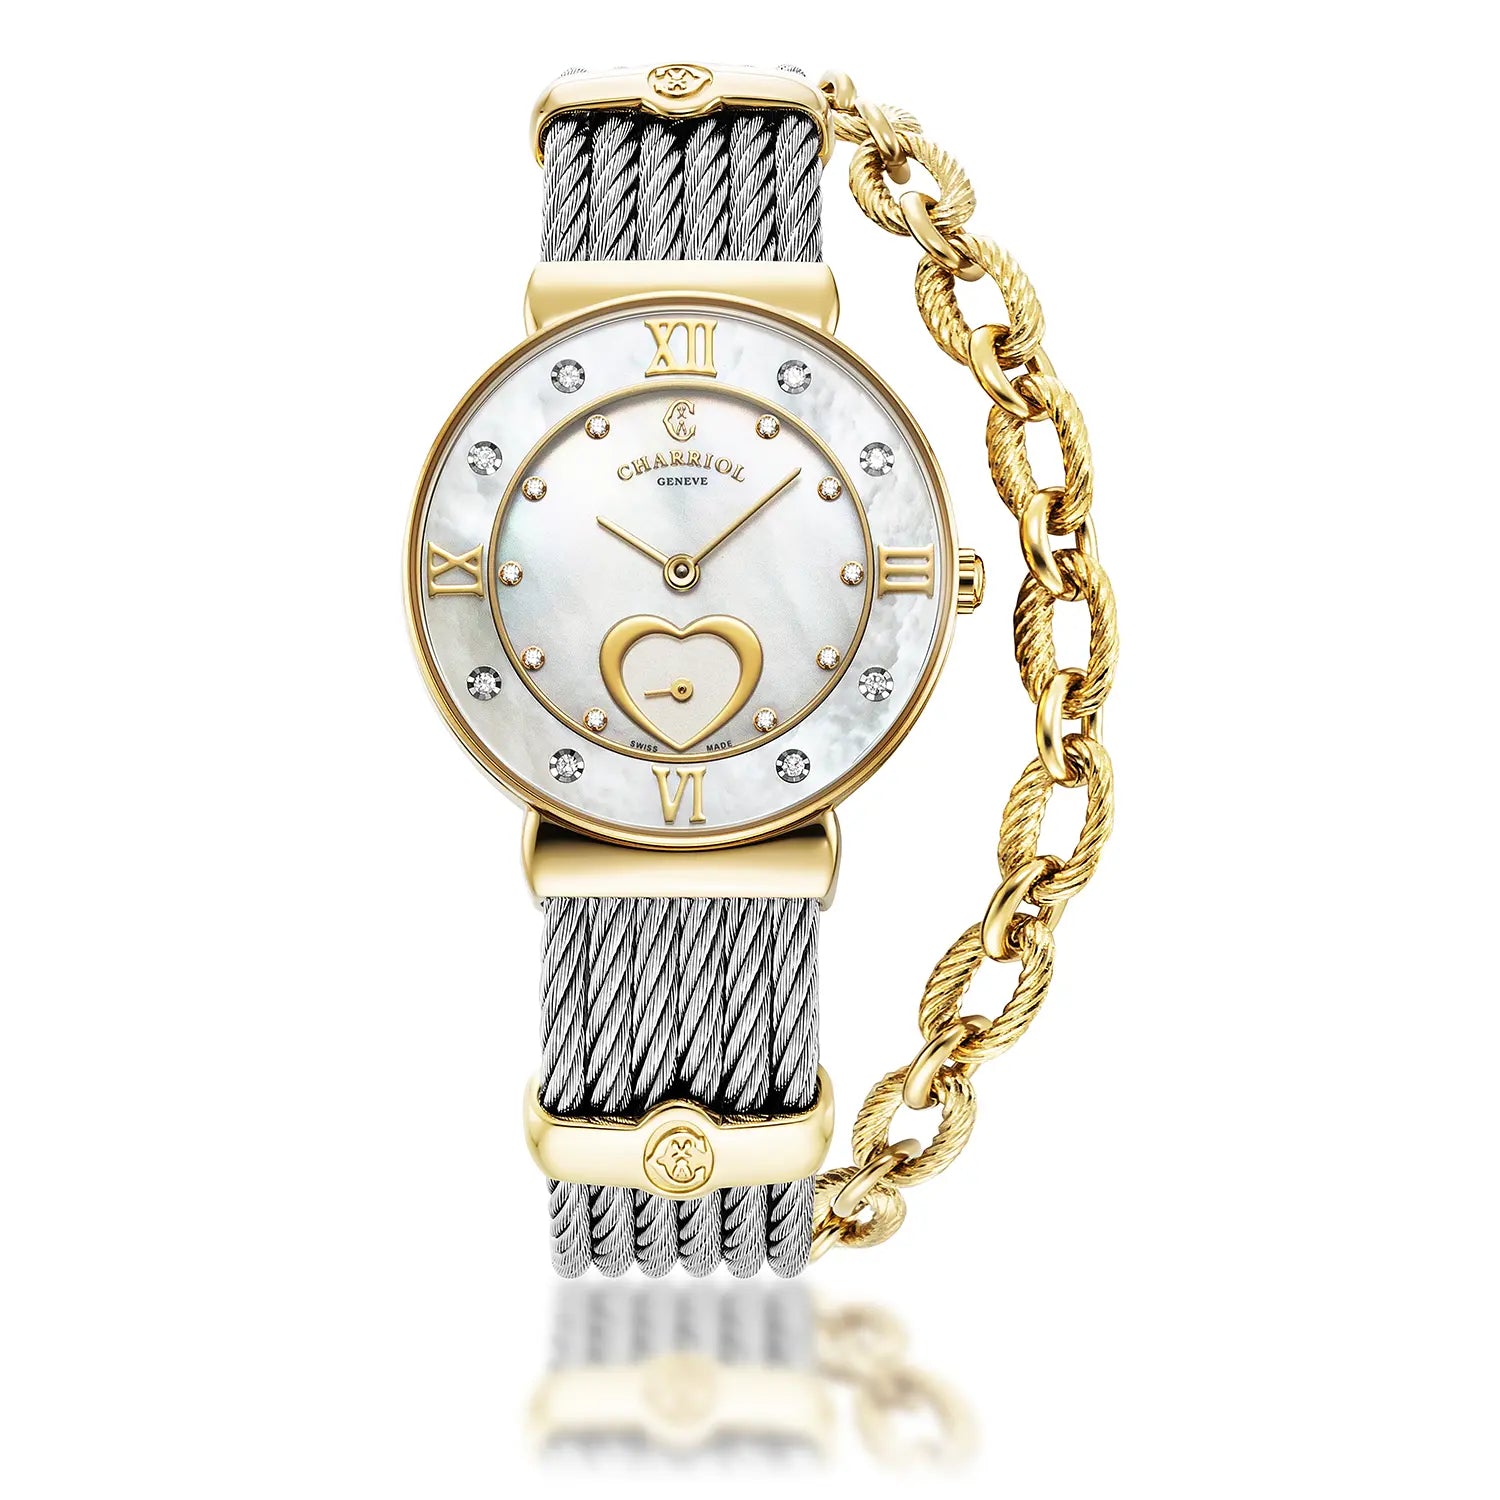 ST TROPEZ ICON, 30MM, QUARTZ CALIBRE, MOTHER-OF-PEARL HEART DIAL, MOTHER-OF-PEARL WITH 8 DIAMONDS BEZEL, STEEL CABLE BRACELET - Charriol Geneve -  Watch